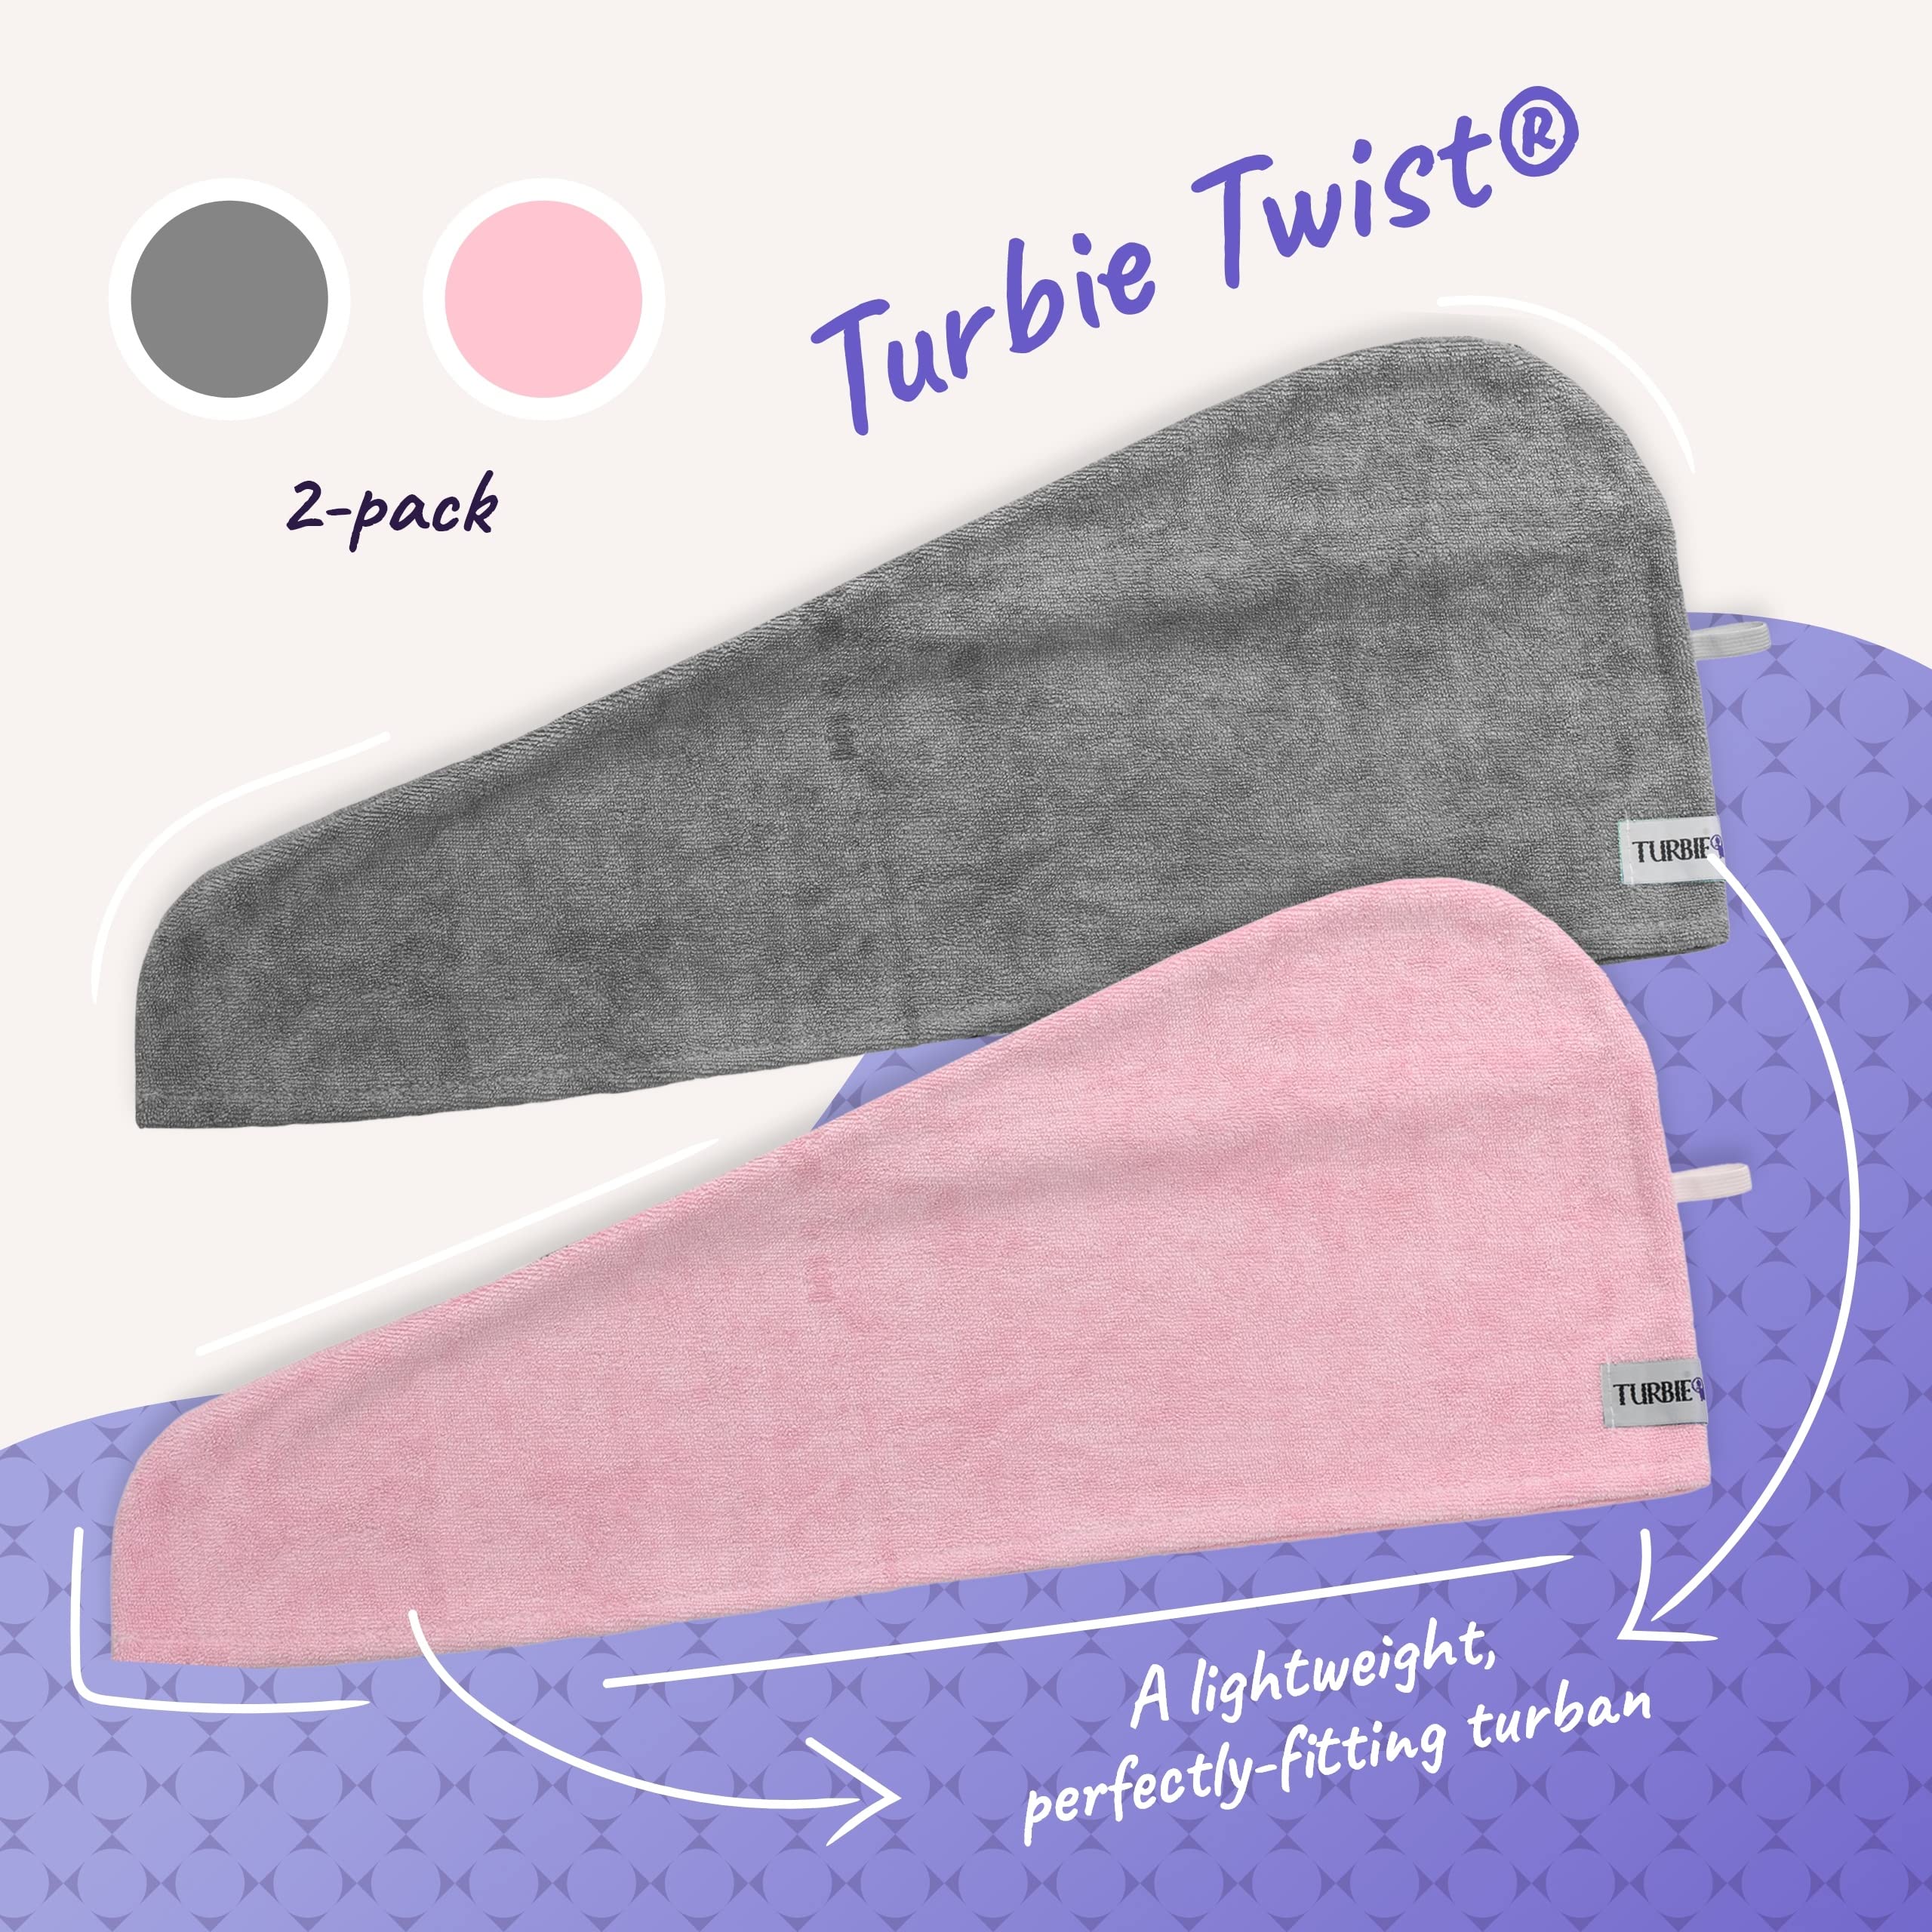 Turbie Twist Microfiber Hair Towel Wrap for Women and Men | 2 Pack | Bathroom Essential Accessories | Quick Dry Hair Turban for Drying Curly, Long & Thick Hair (Grey, Light Pink)